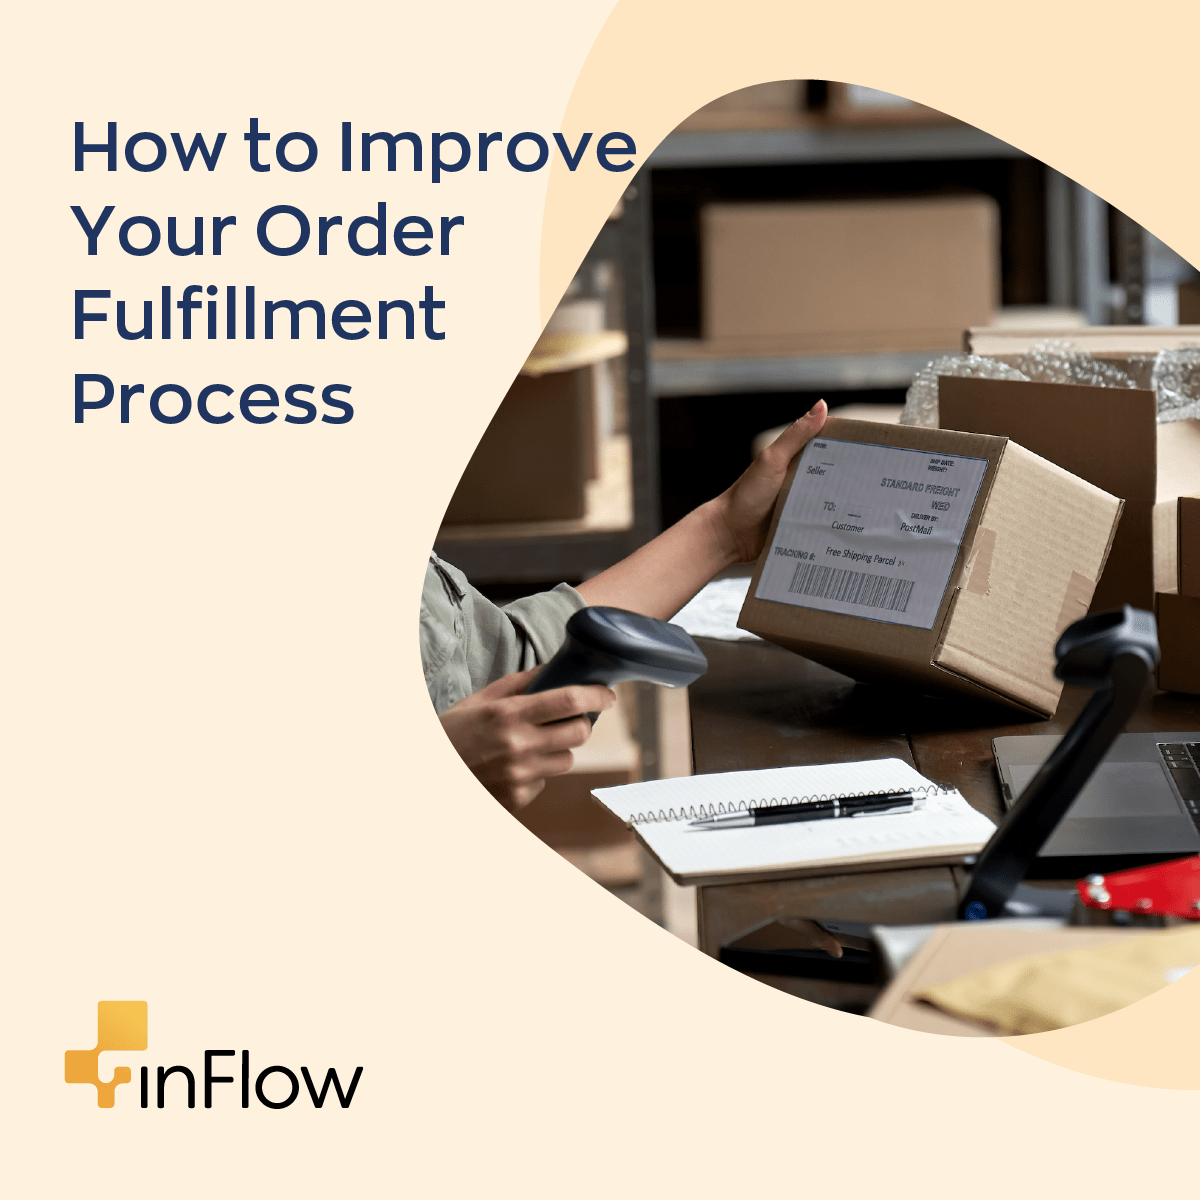 How to Improve Order Fulfillment Process At Your Small Business